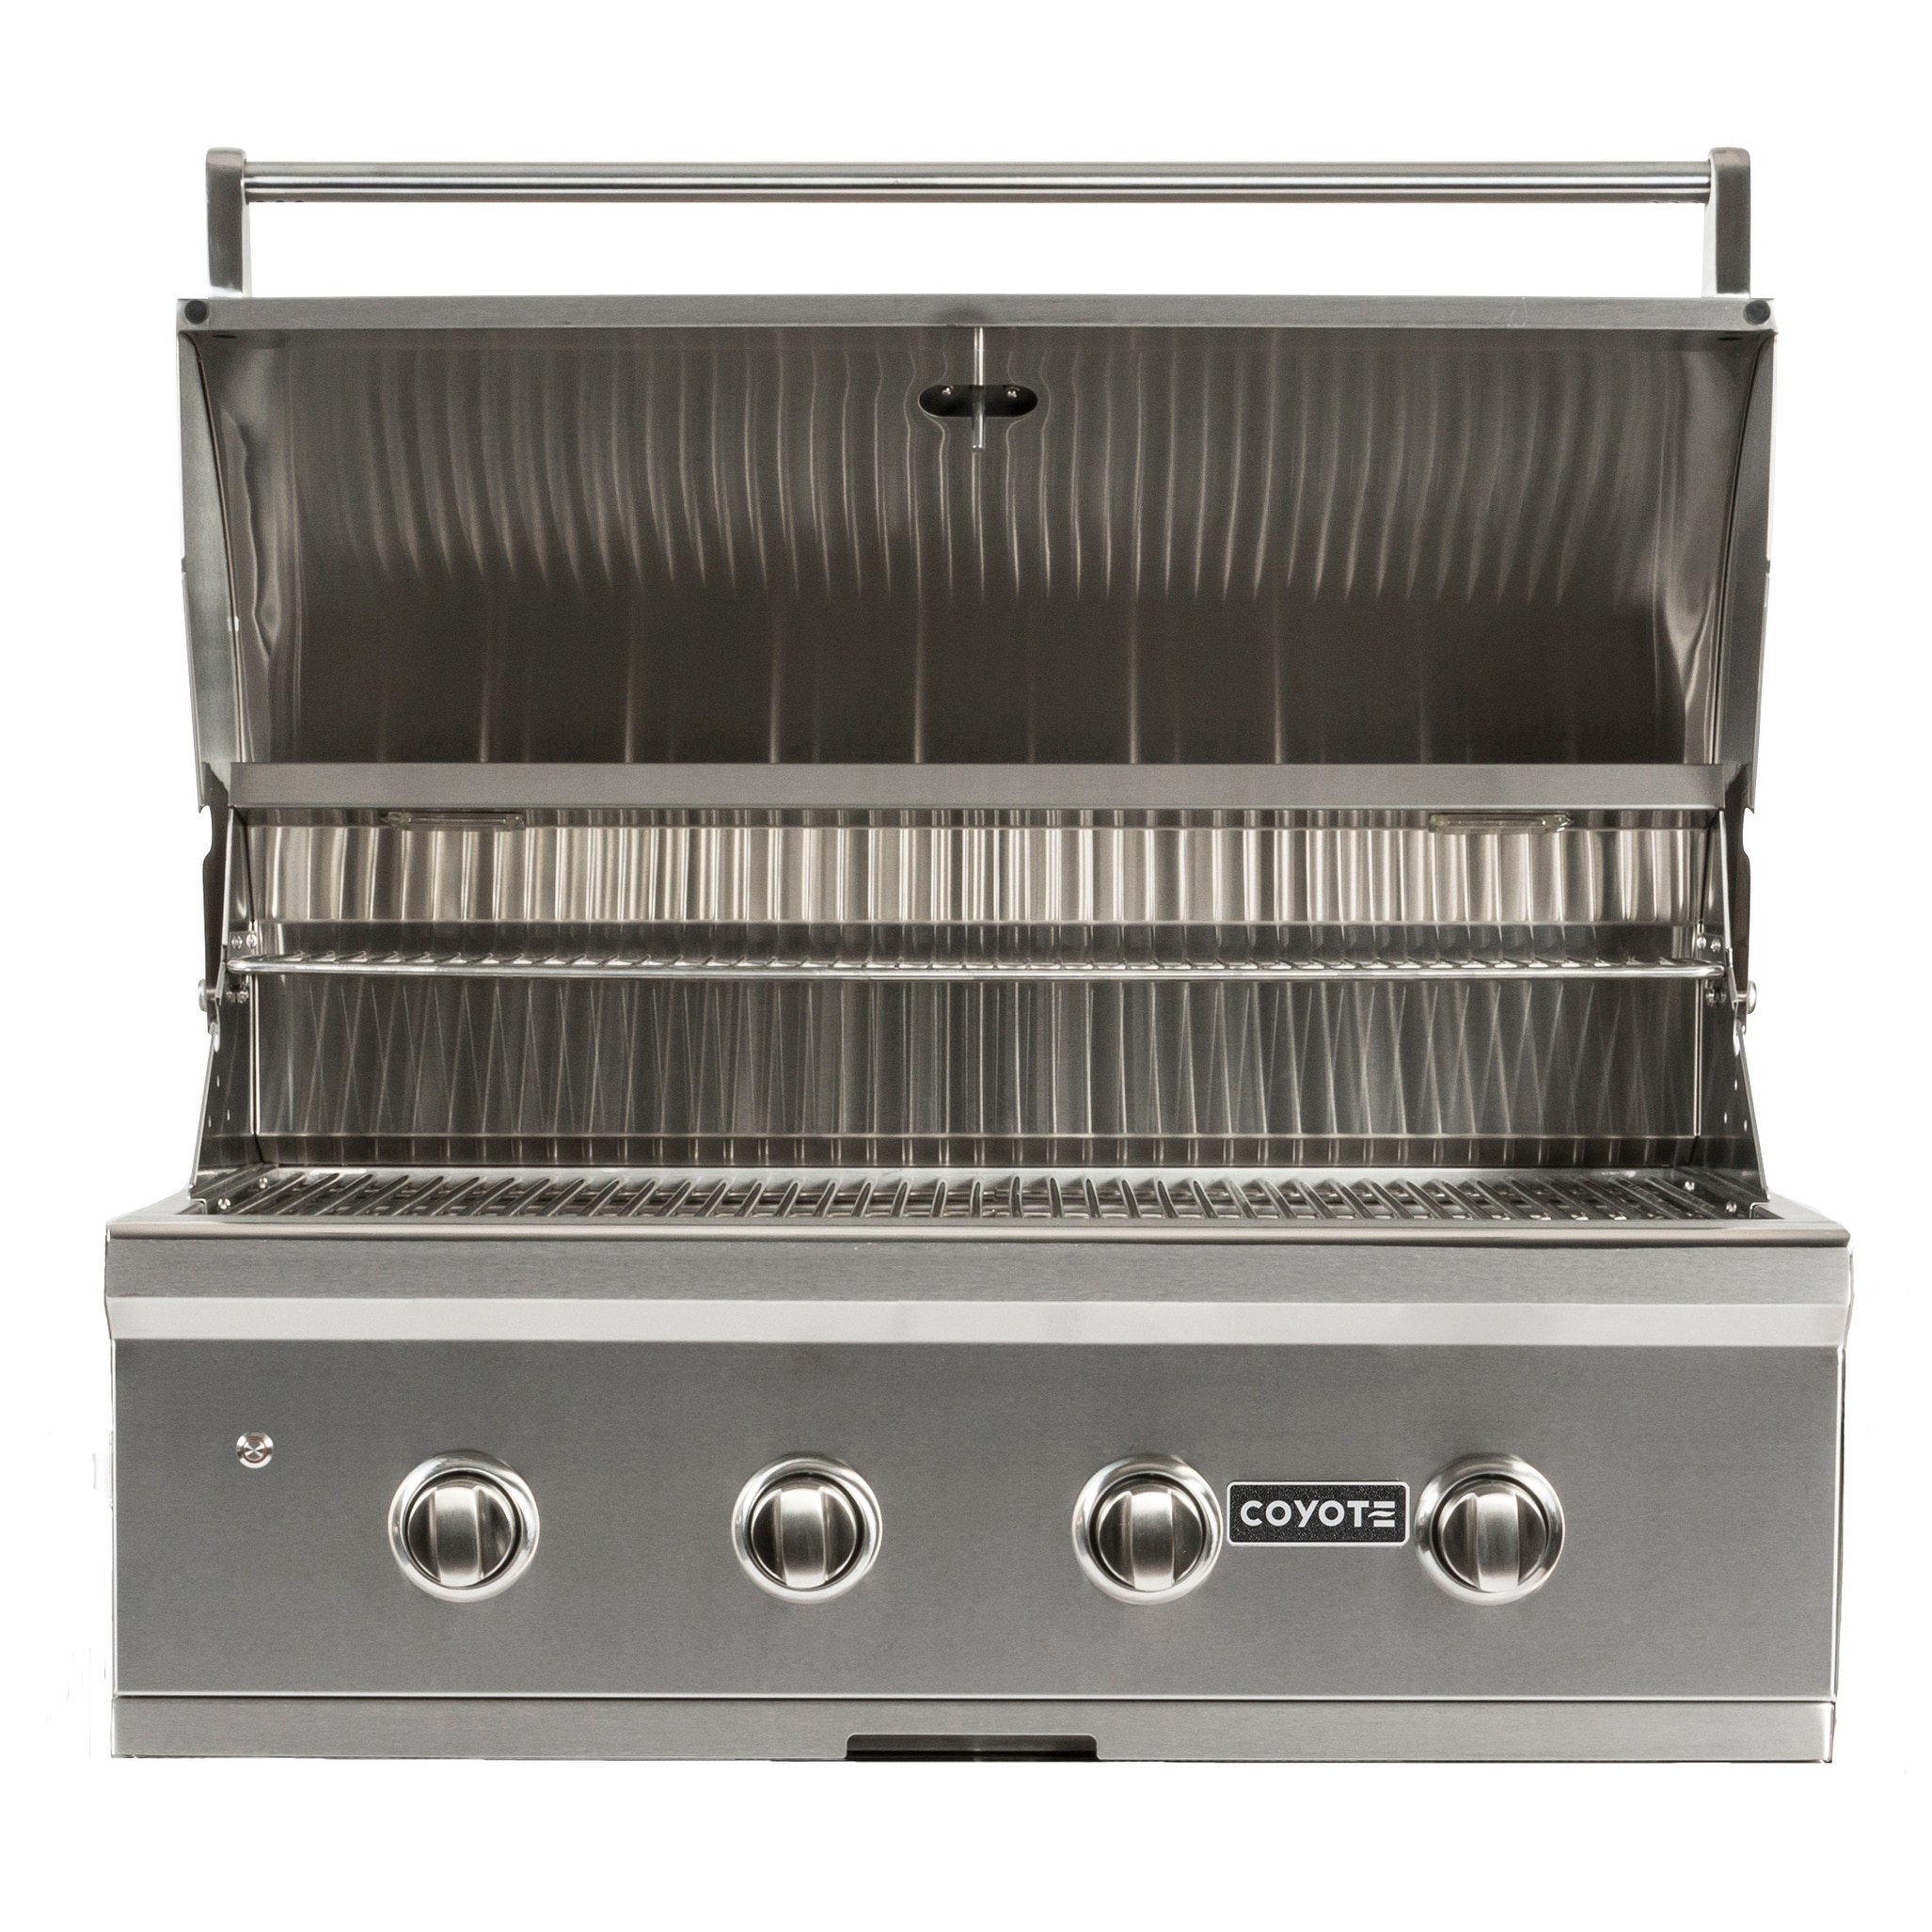 Coyote 36 Inch Grill With Infinity Burners - Natural Gas